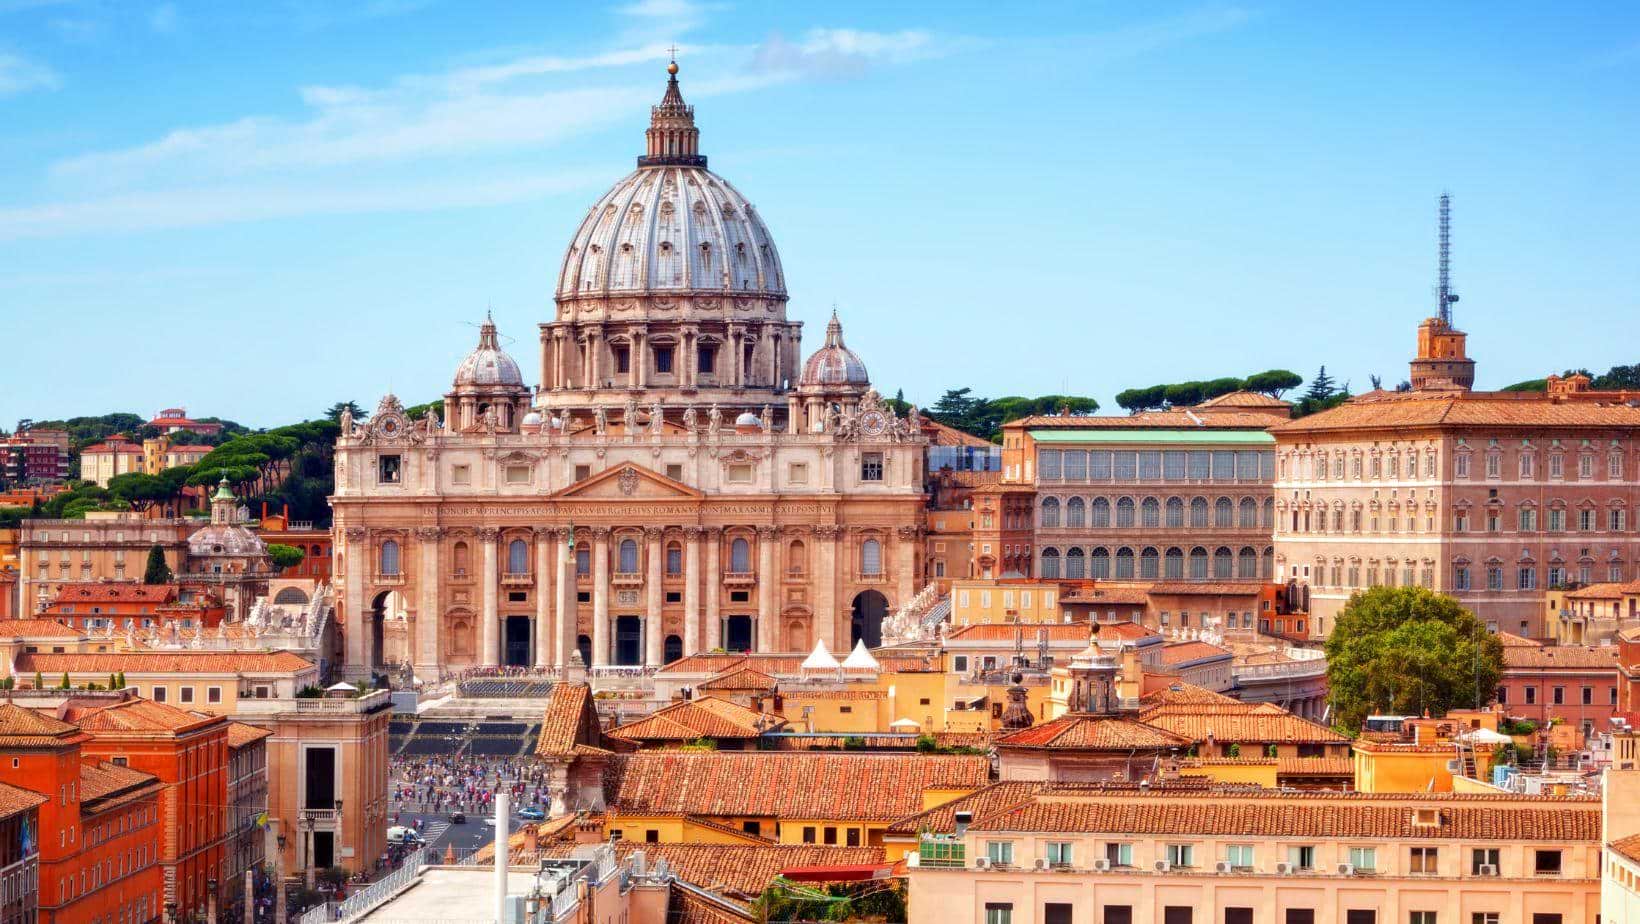 Museums In Italy: Vatican Museums